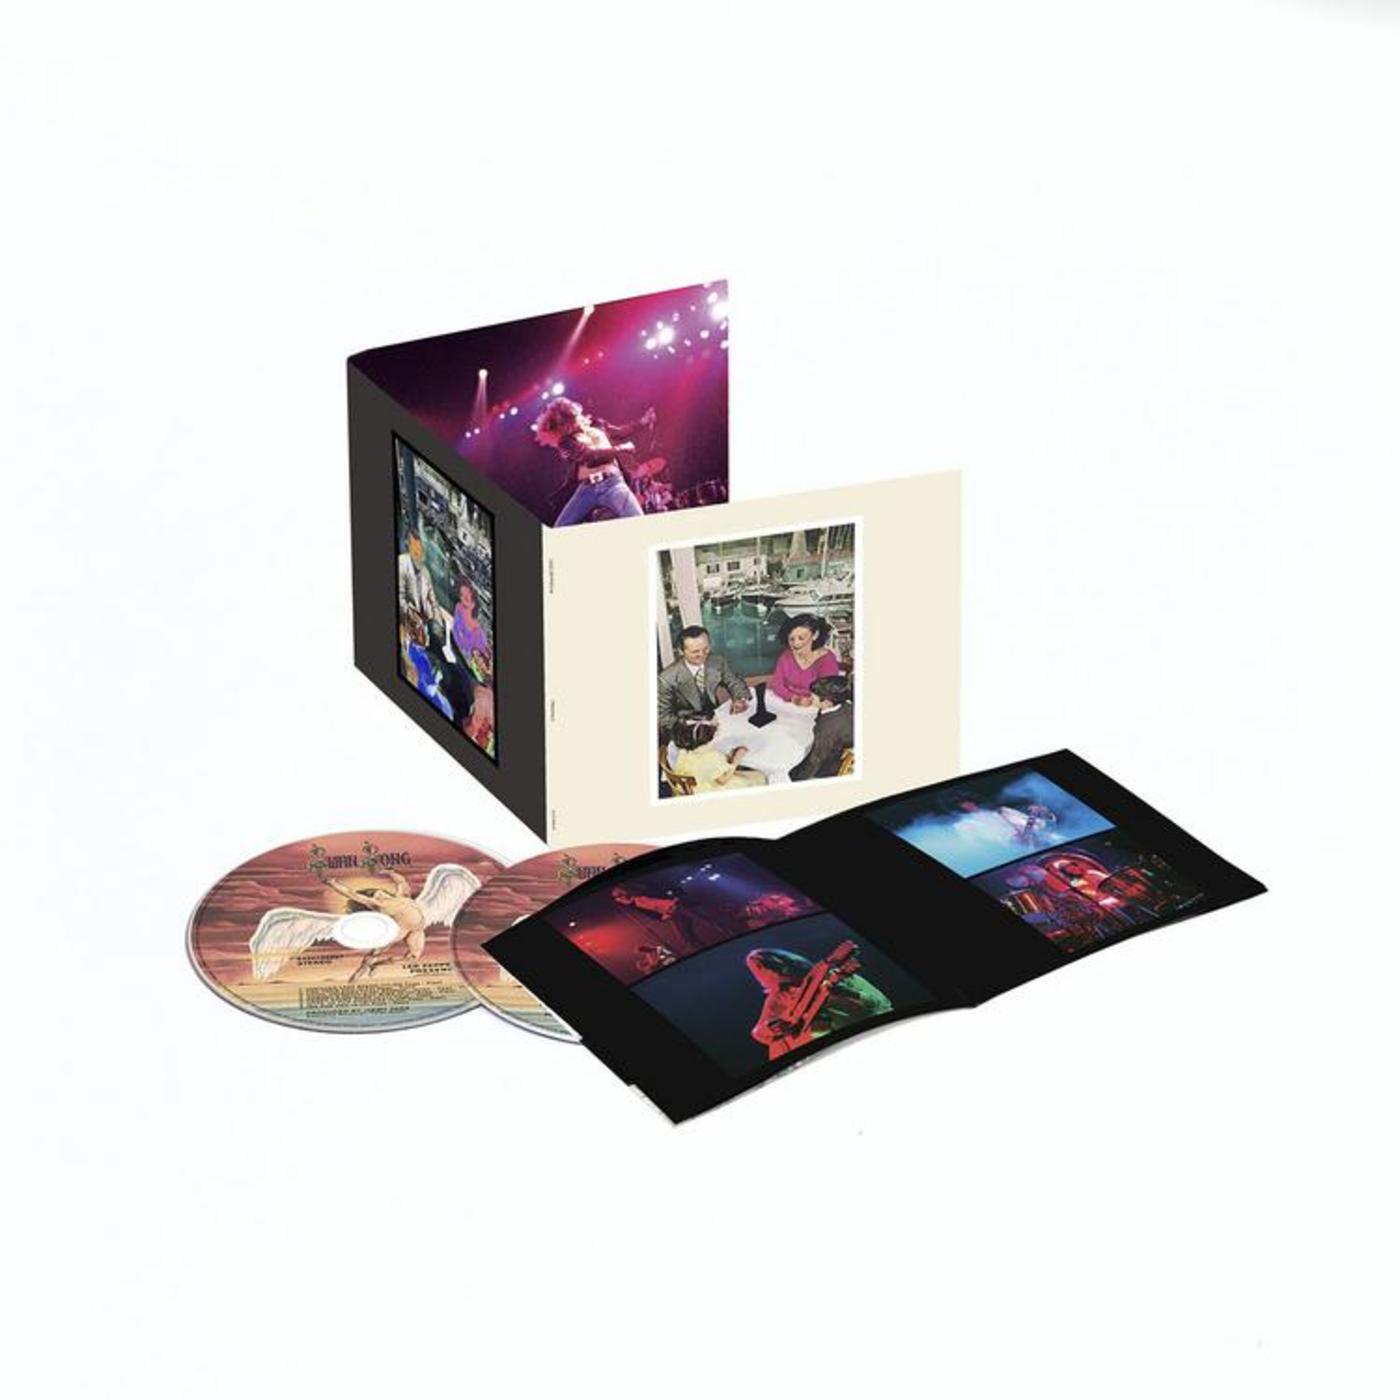 Presence - 2CD Deluxe Edition